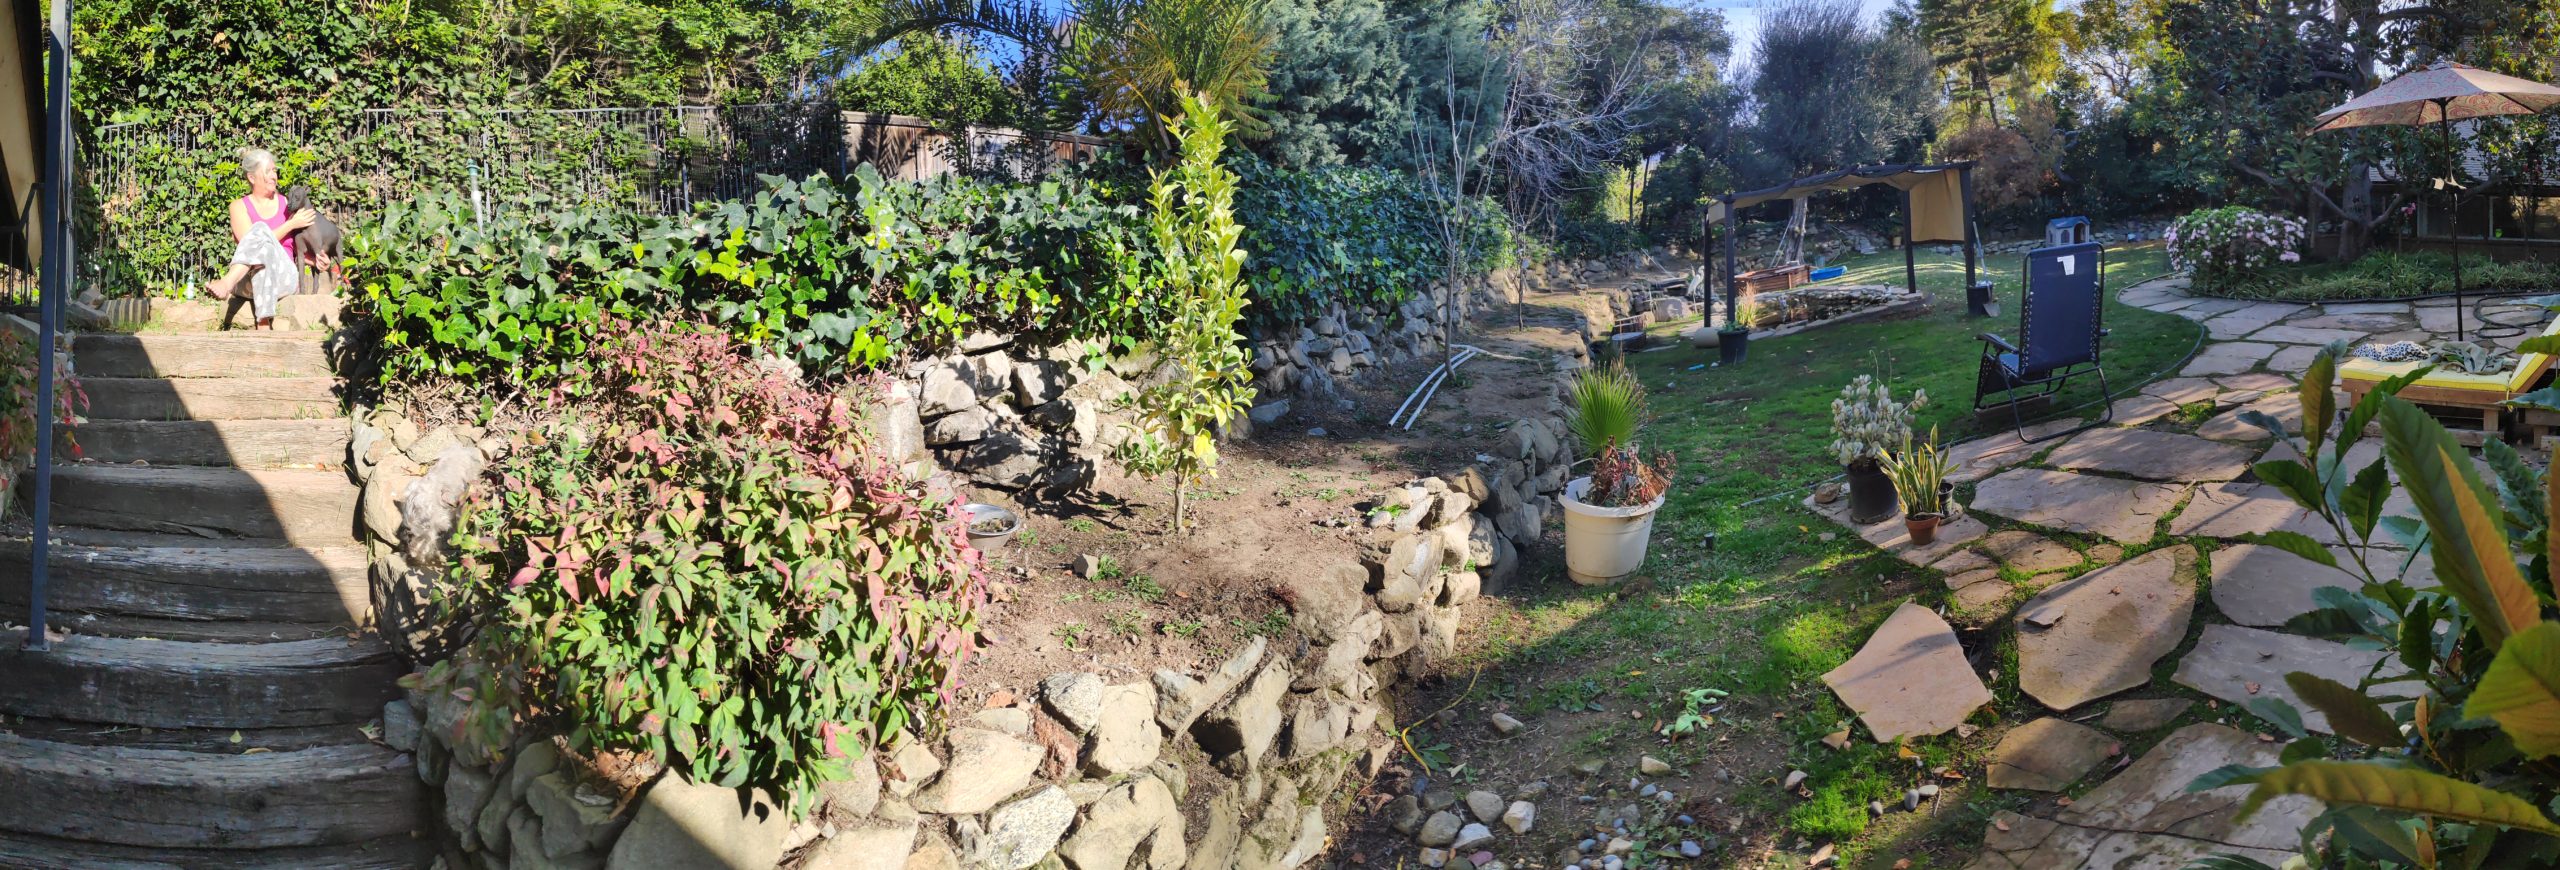 Panorama of yard with woman and dog sitting in a spot of sunlight.